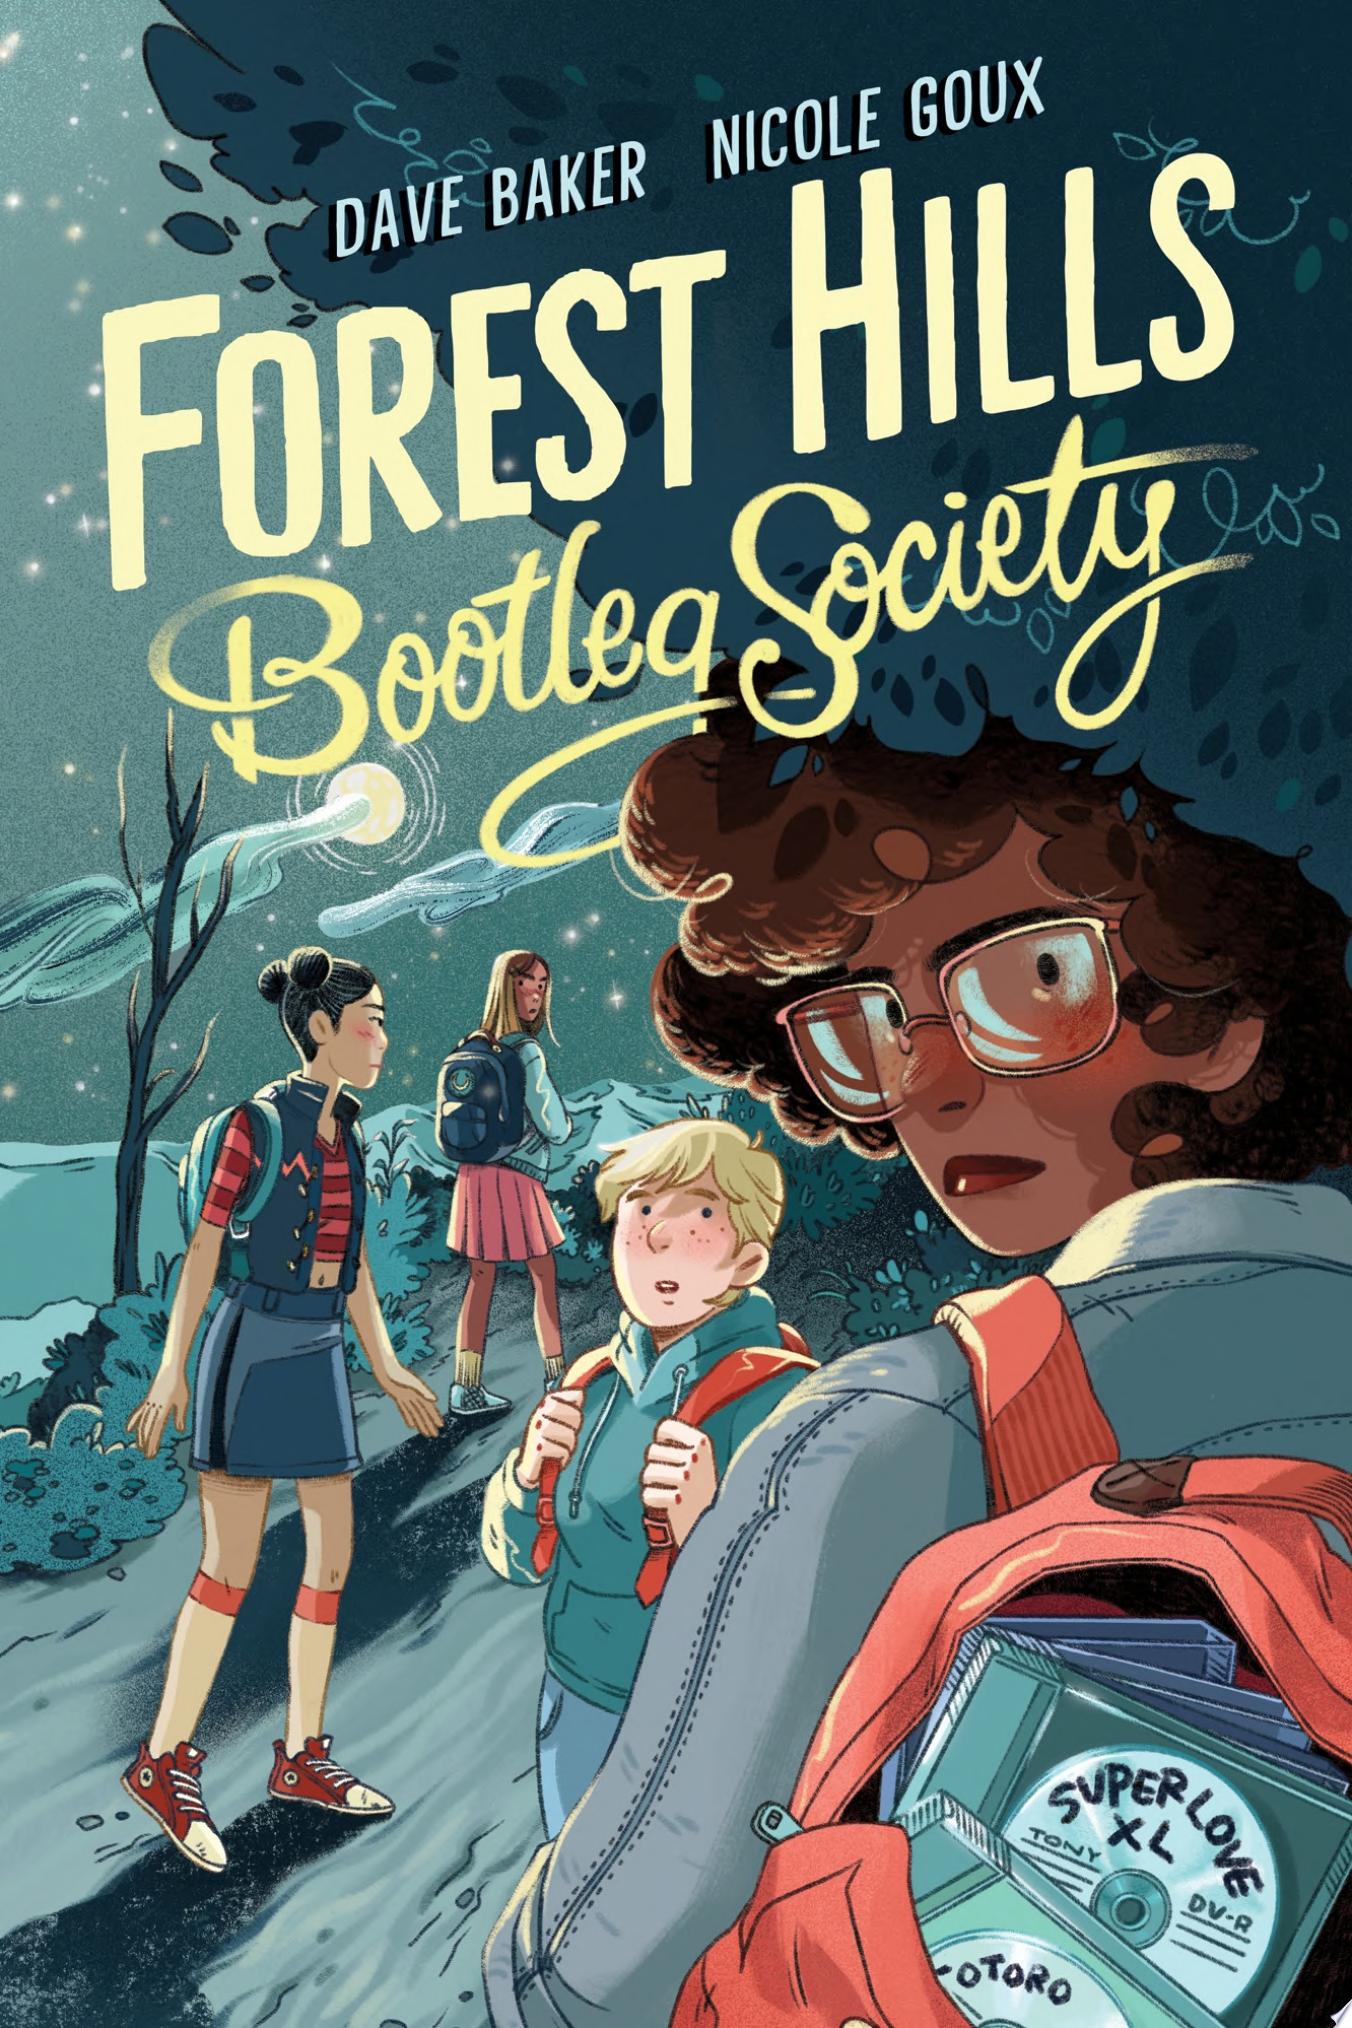 Image for "Forest Hills Bootleg Society"